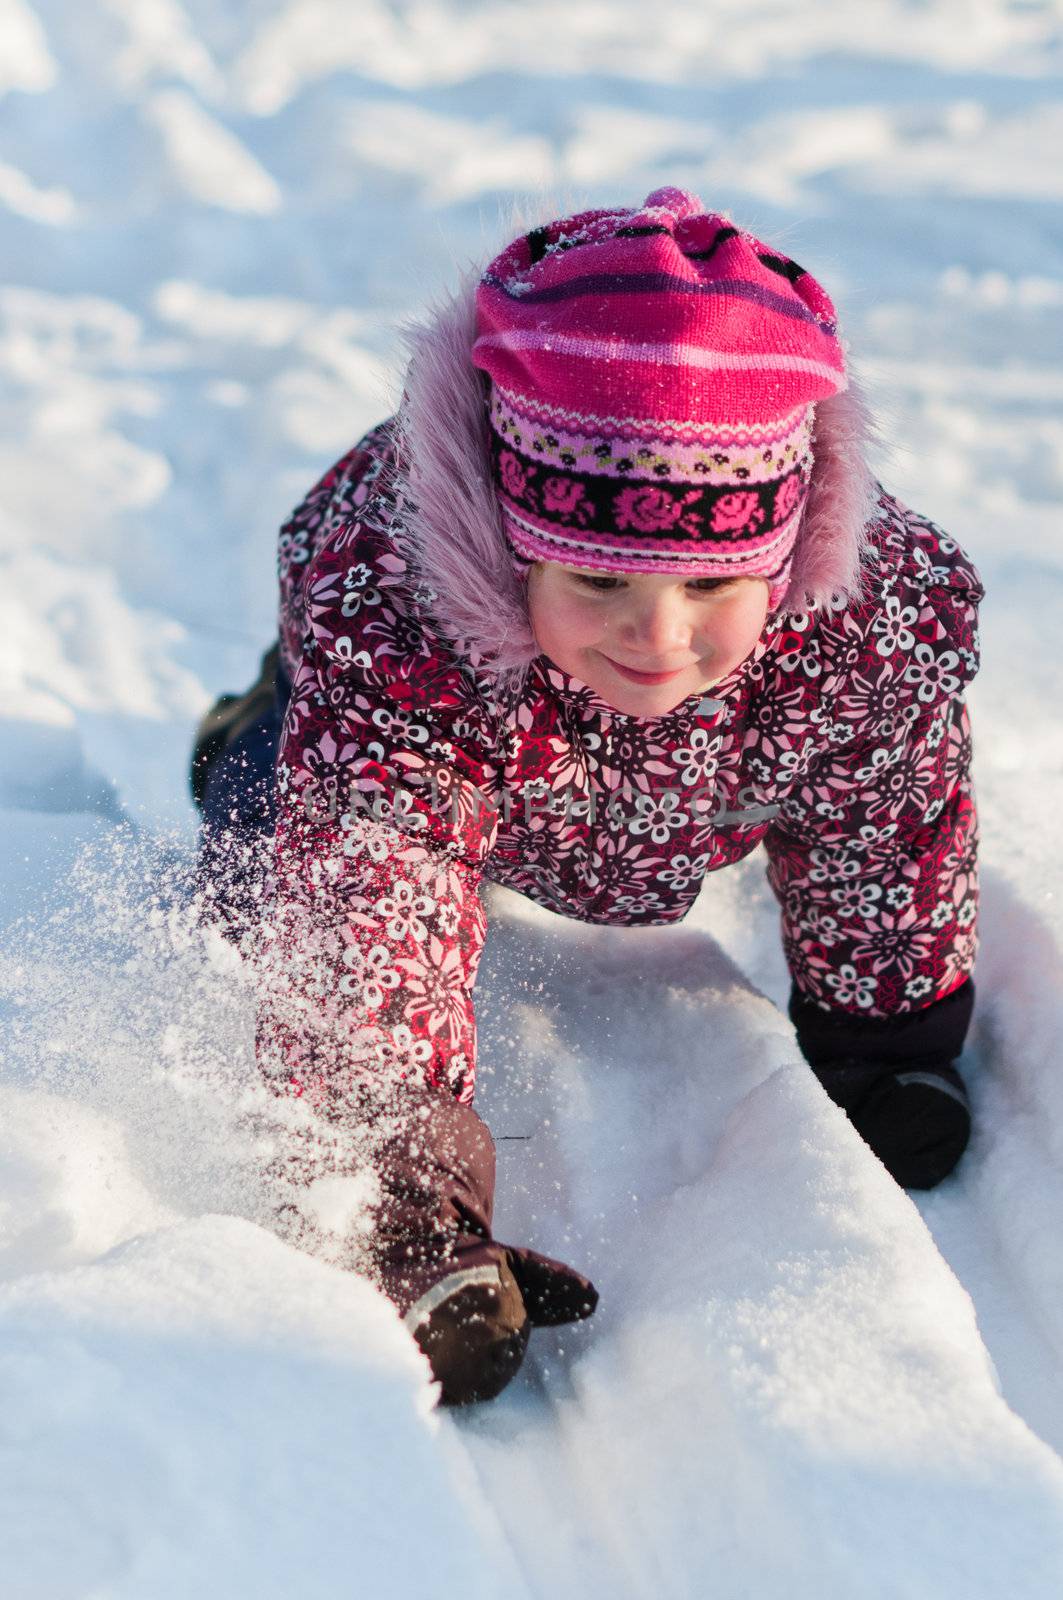 Baby crawls all fours on snow and smile